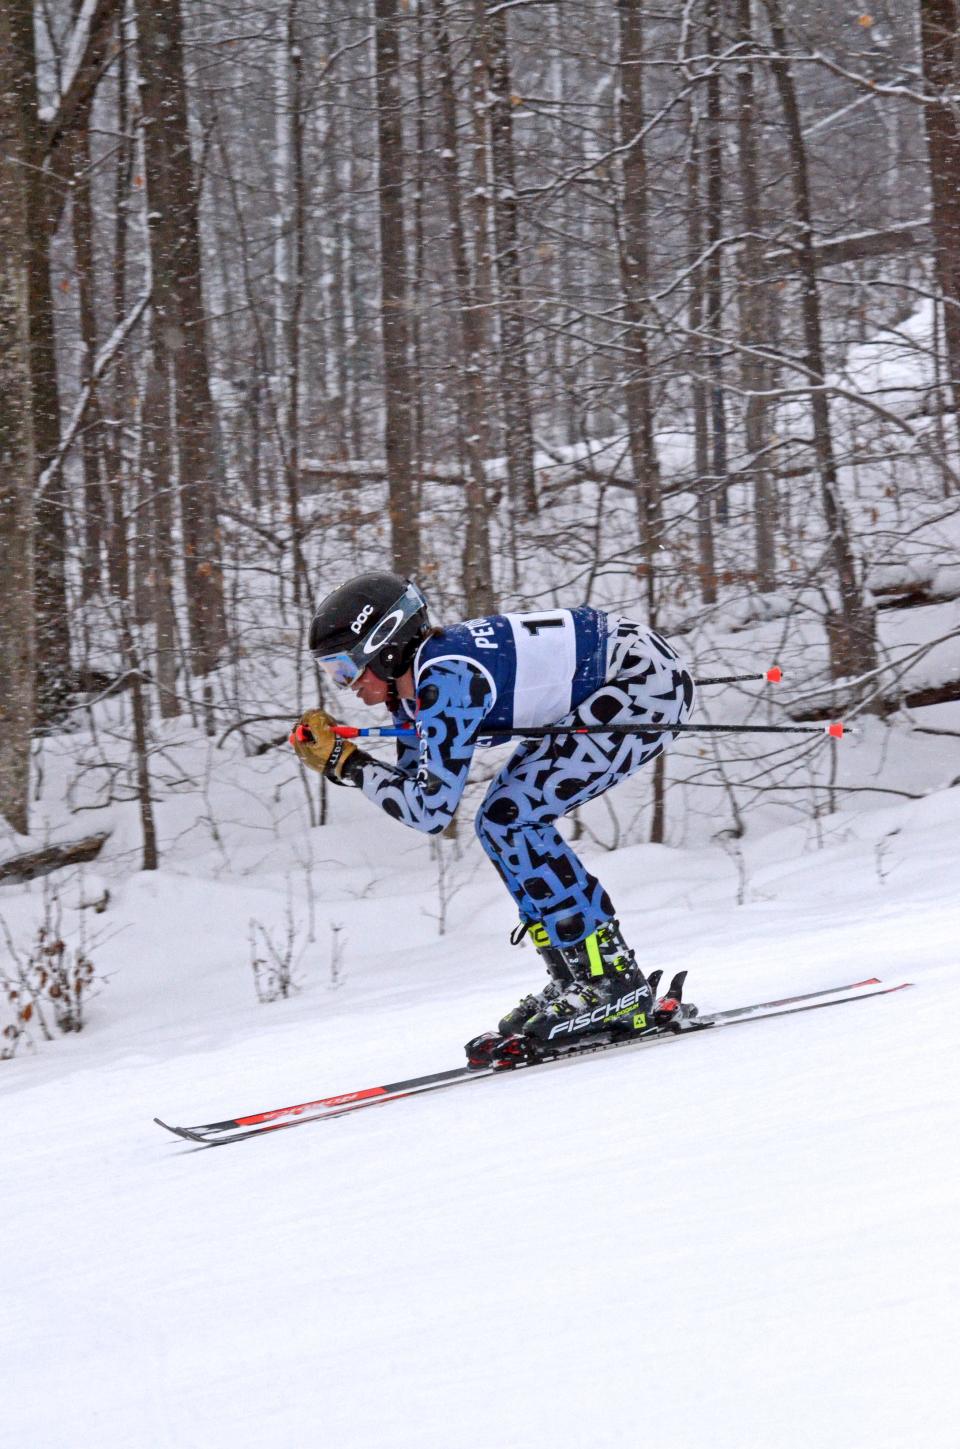 Petoskey's Gavin Galbraith earned a pair of top 10 finishes to open the season on Monday at Schuss Mountain.